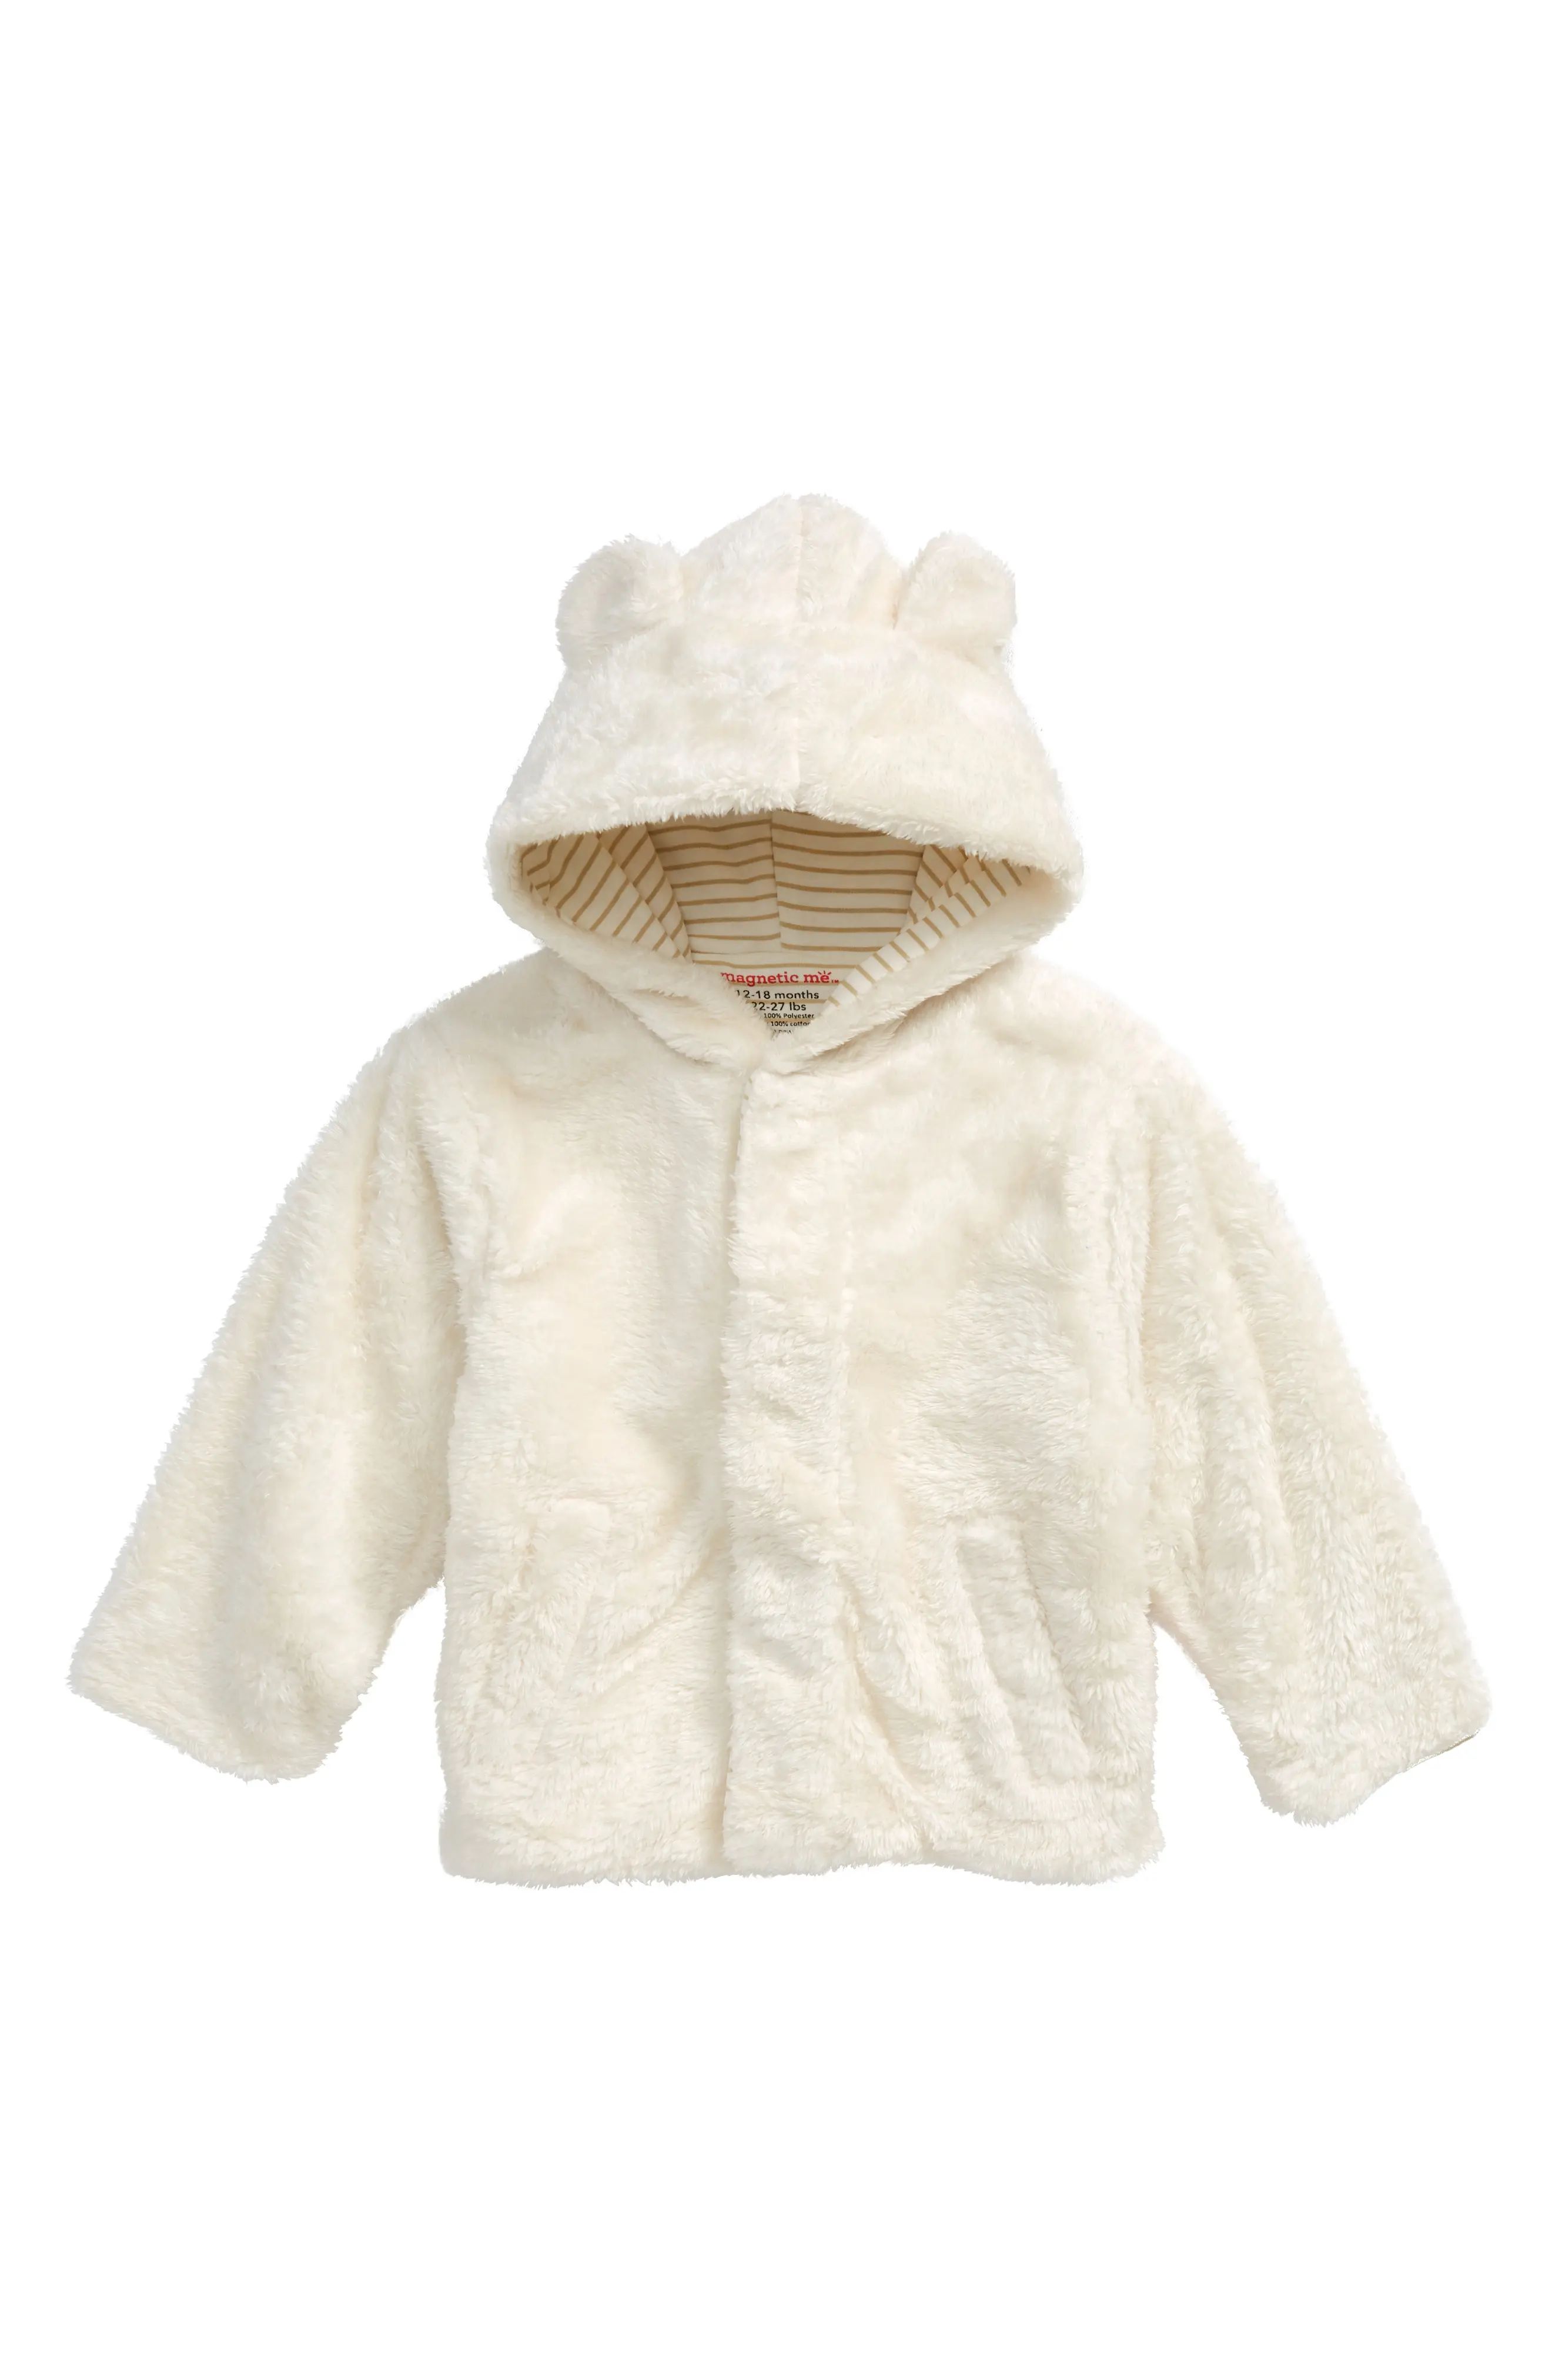 Magnetic Me Minky Fleece Hooded Jacket in Cream at Nordstrom, Size 0-6M | Nordstrom